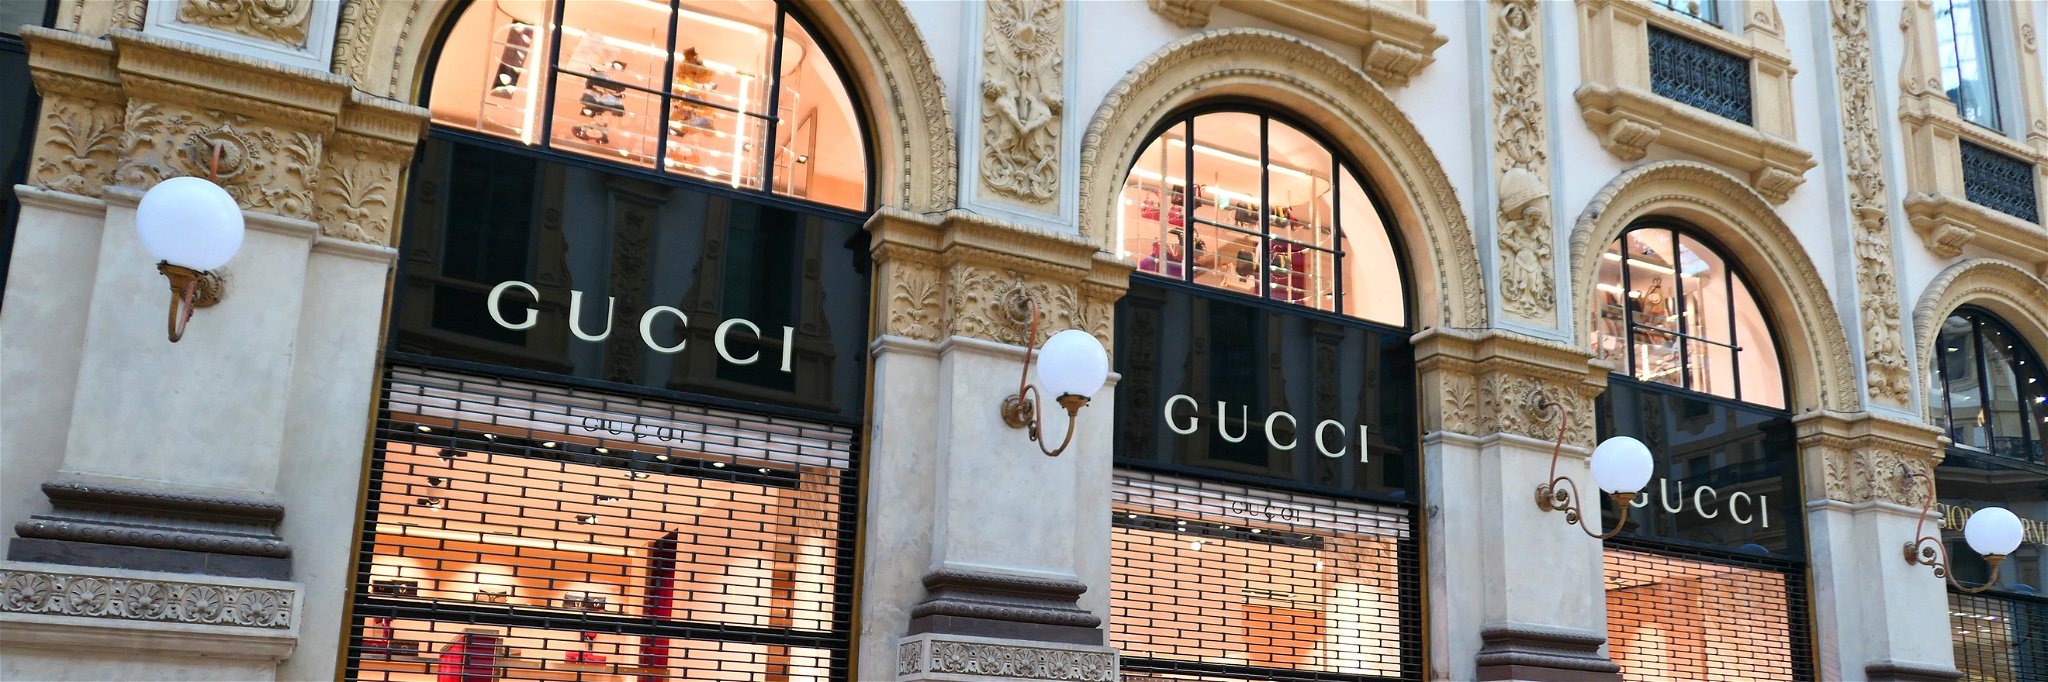 Gucci&nbsp;will accept&nbsp;cryptocurrency&nbsp;payments in some select US stores.&nbsp;